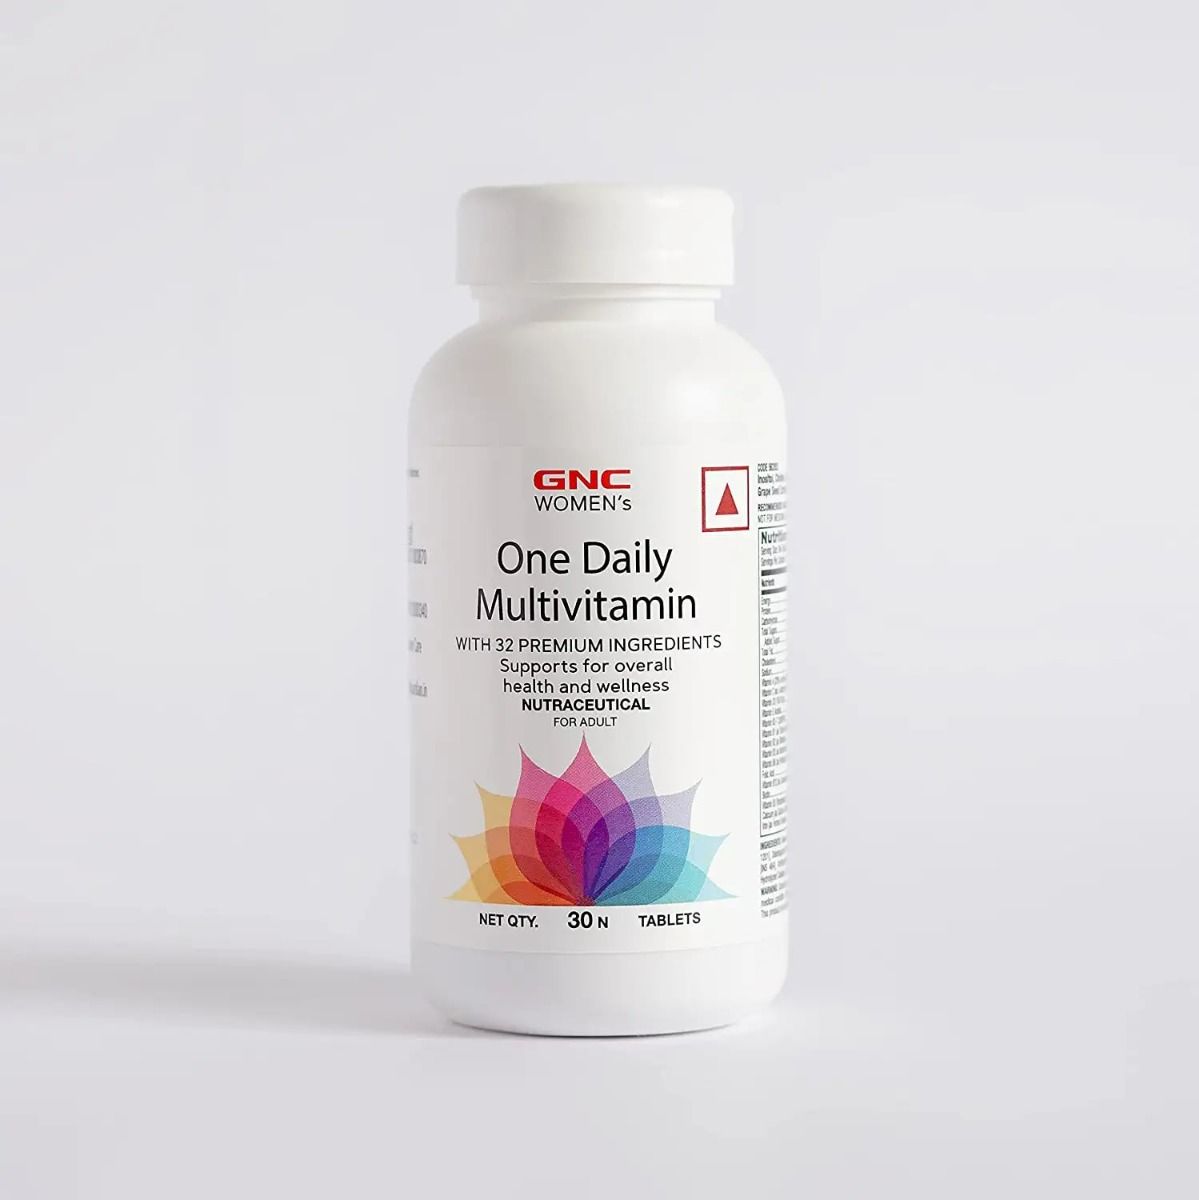 Buy GNC Women's One Daily Multivitamin, 30 Tablets Online